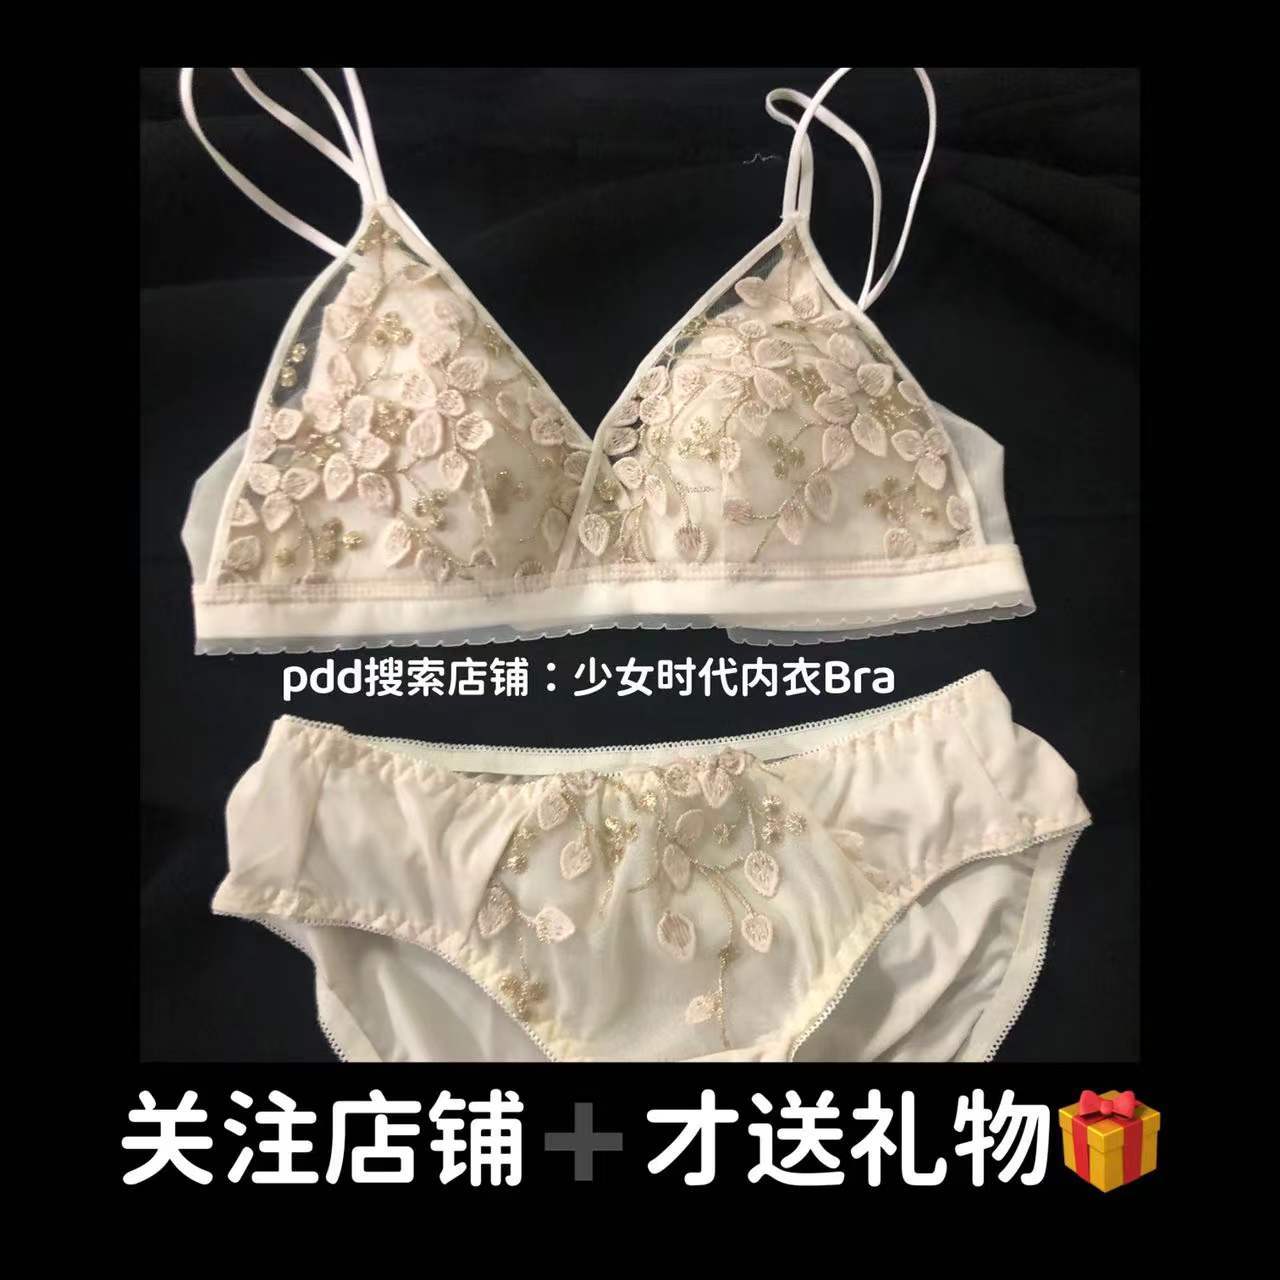 Pure desire wind underwear no steel ring gathered anti-sagging bra French white lace ultra-thin sexy triangle cup bra